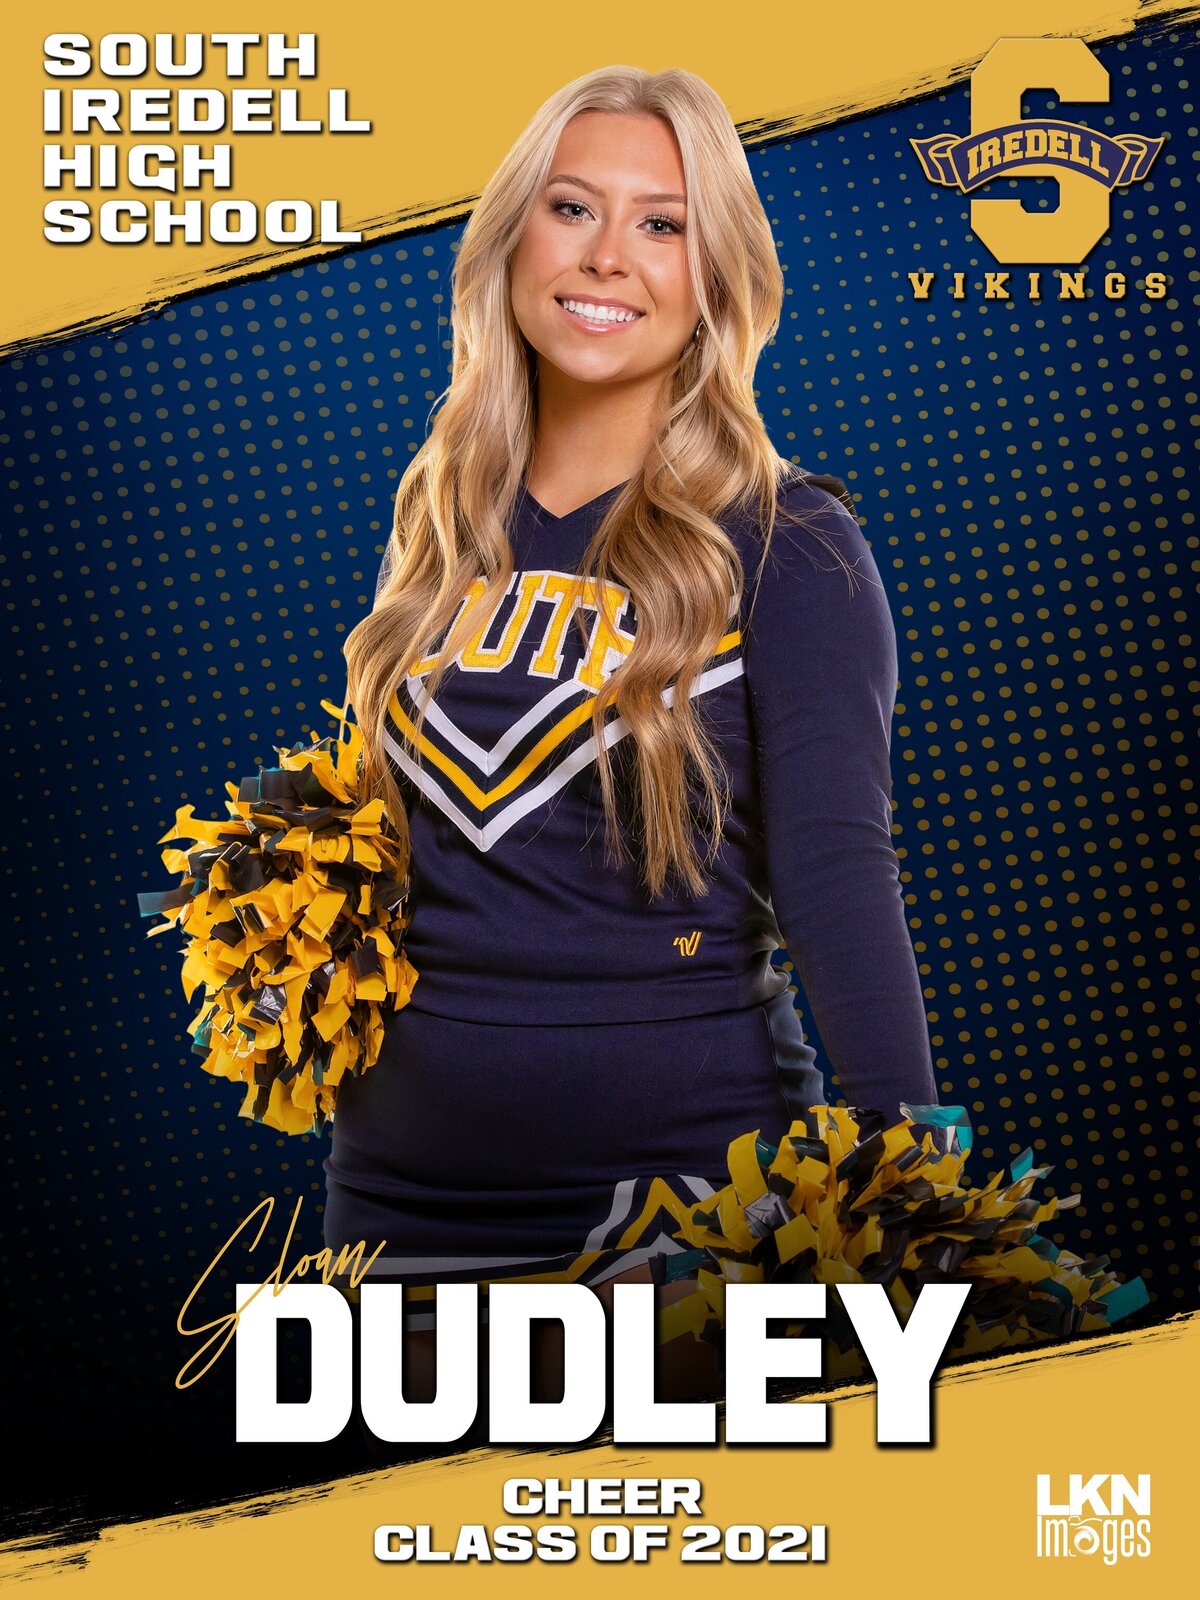 2021 SIHS Cheer - Dudley